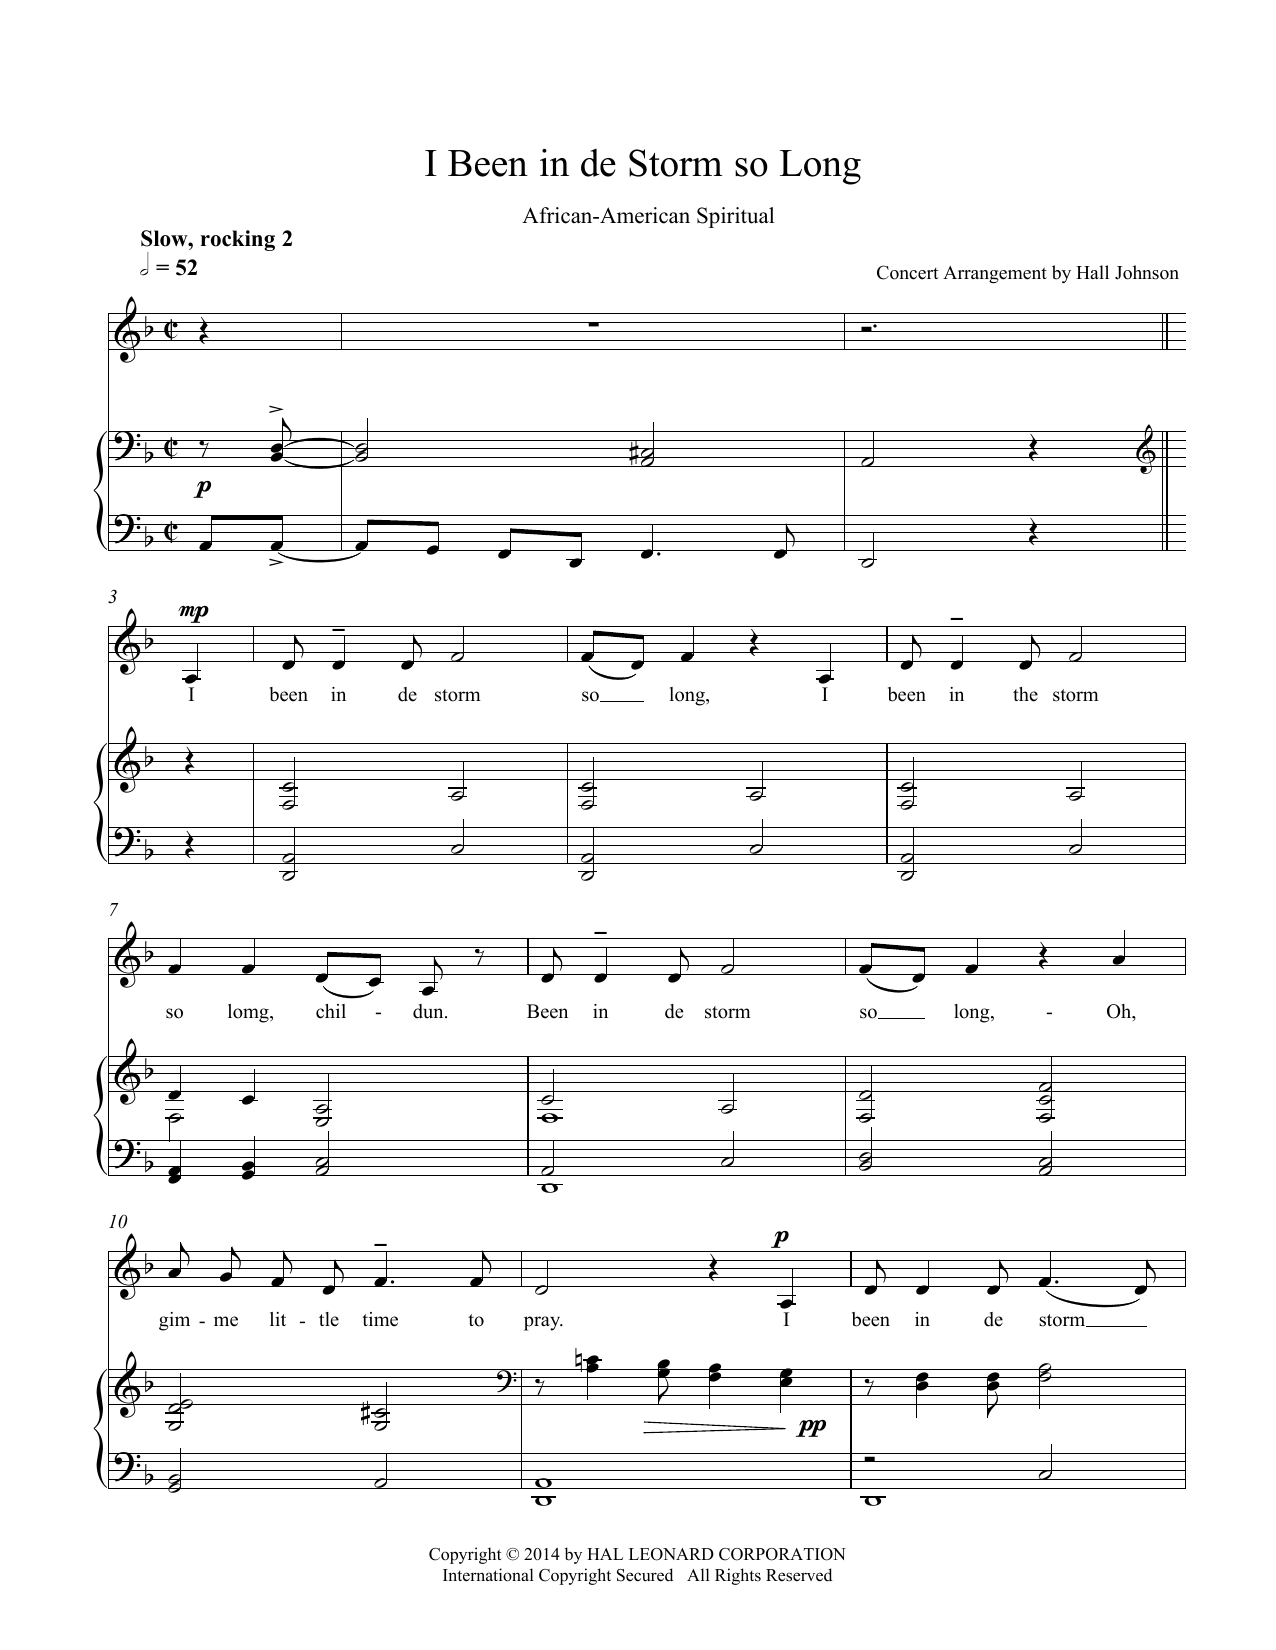 Hall Johnson I Been in de Storm So Long (D minor) sheet music notes and chords. Download Printable PDF.